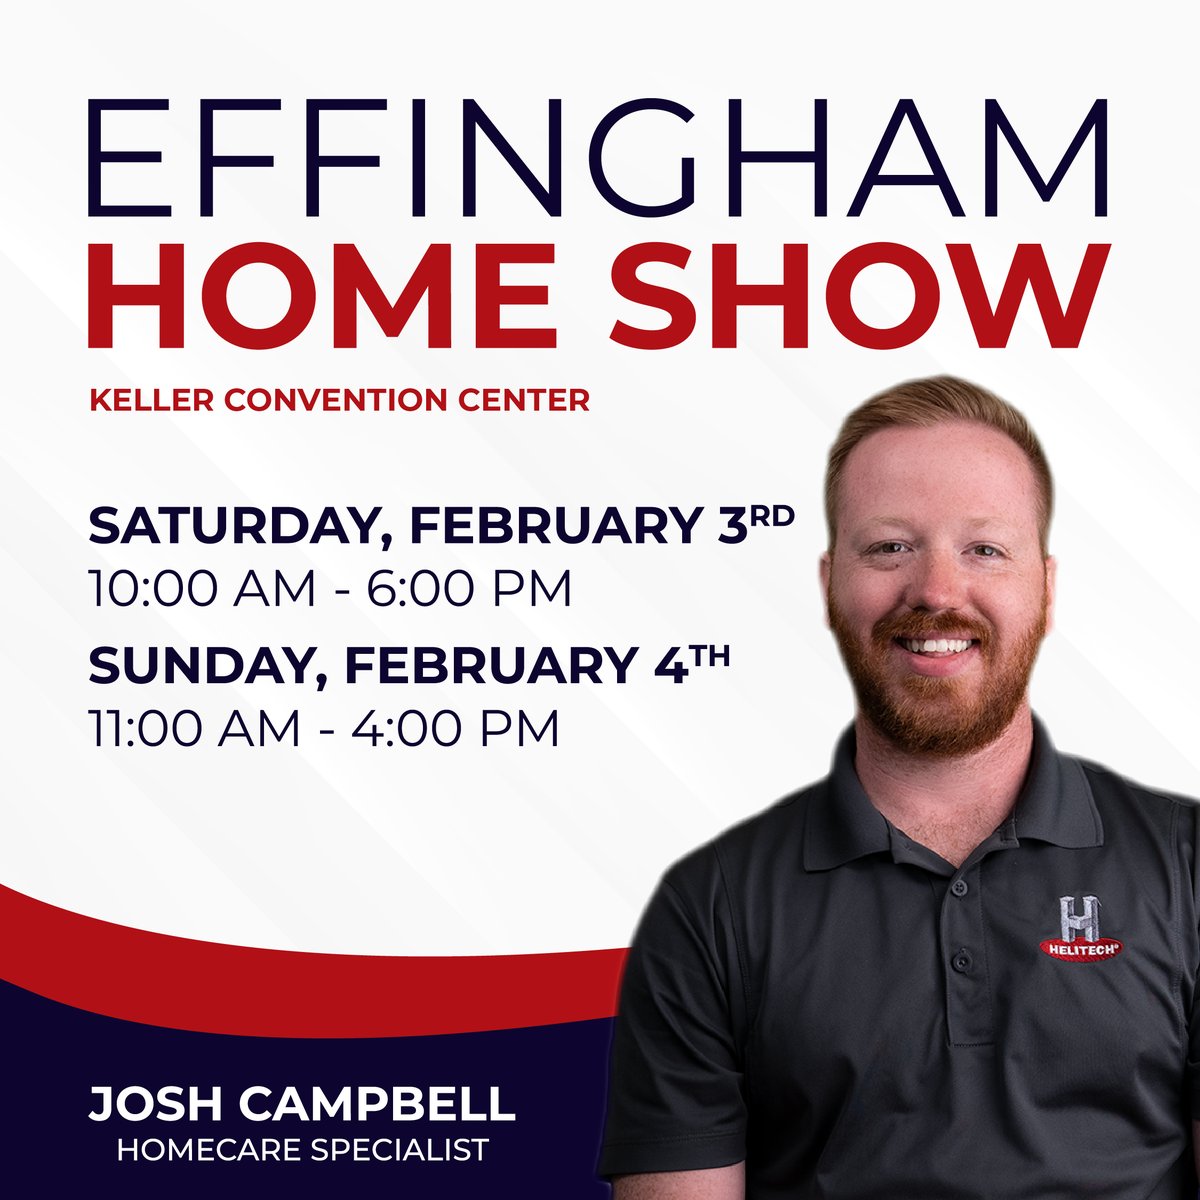 Join us at the Effingham Home Show this weekend!
Mark your calendars for Saturday, Feb. 3rd (10am-6pm) and Sunday, Feb. 4th (11am-4pm). We look forward to seeing you there! 🏡 #EffinghamIL